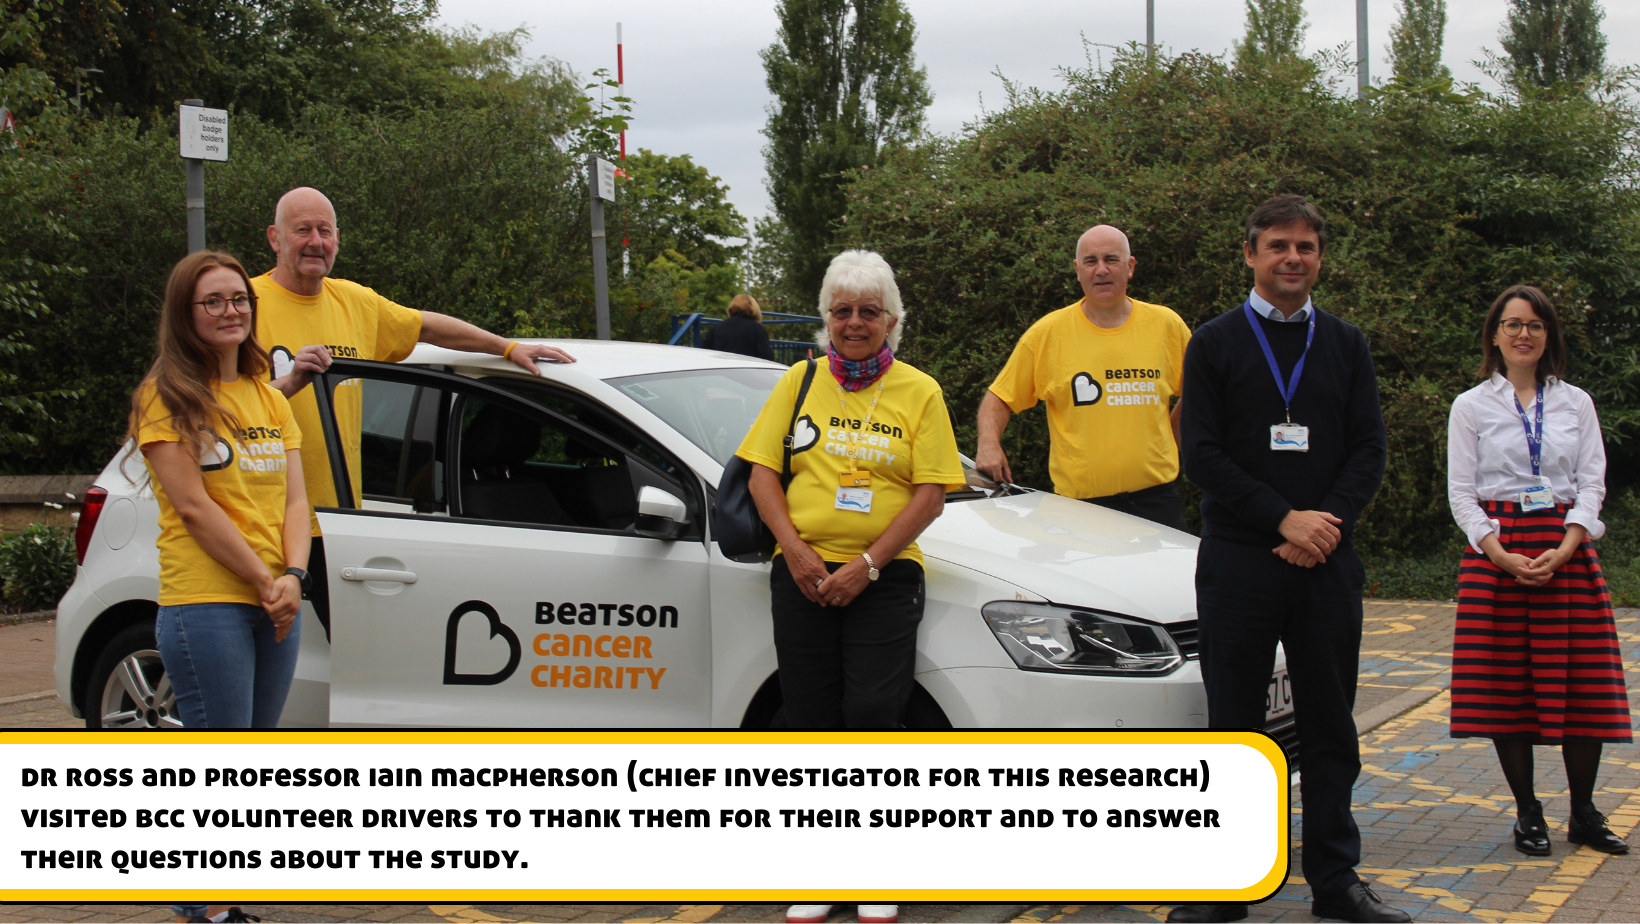 Dr Ross and Professor Iain MacPherson visited BCC Volunteer Drivers to thank them for their support